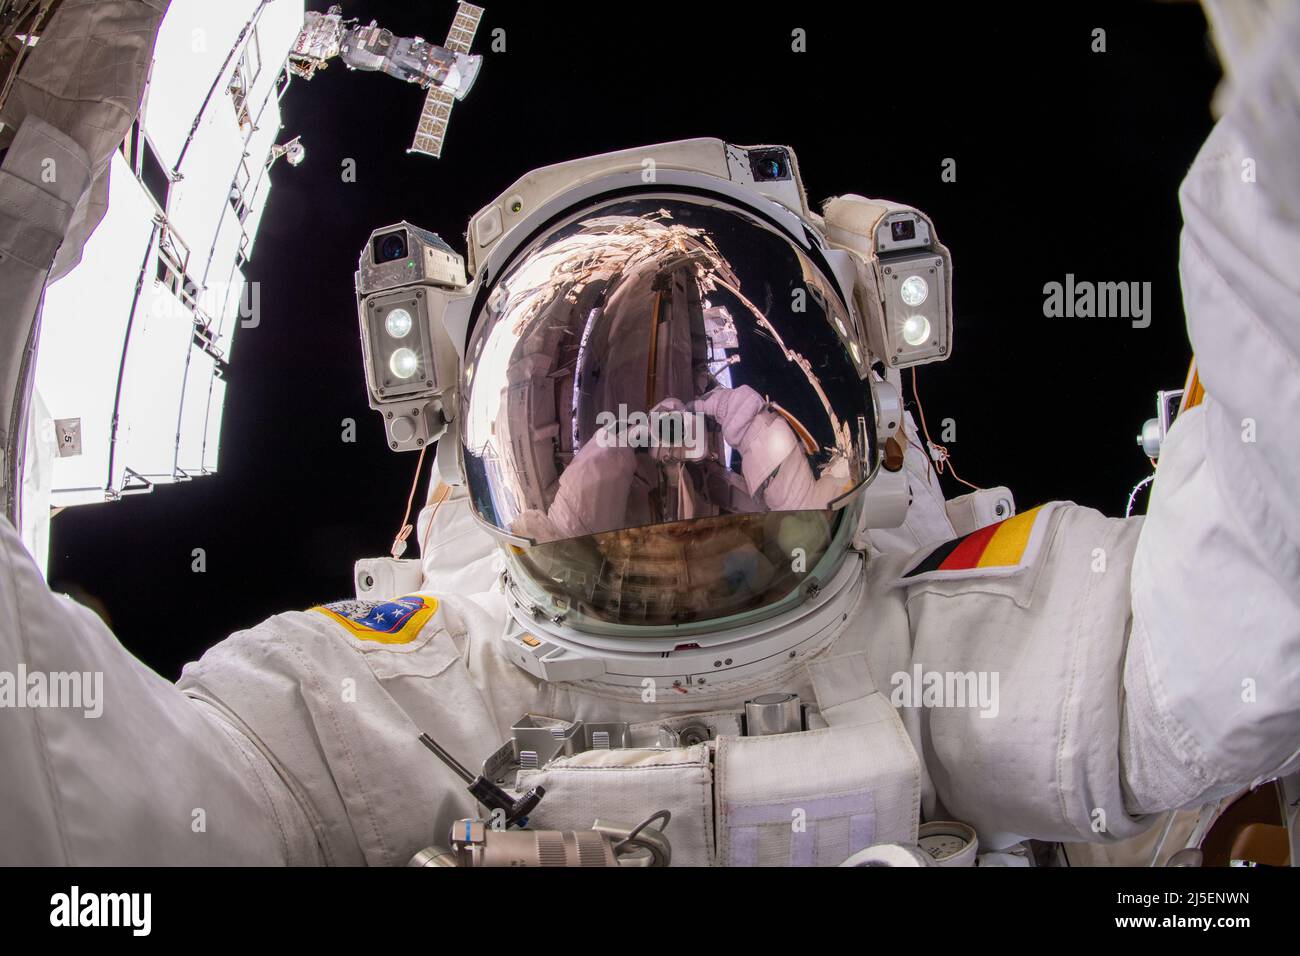 International Space Station, EARTH ORBIT. 23 March, 2022. ESA astronaut and Expedition 66 Flight Engineer Matthias Maurer takes a selfie during a six-hour and 54-minute spacewalk to install thermal gear and electronic components on the International Space Station, March 23, 2022 in Earth Orbit.  Credit: NASA/NASA/Alamy Live News Stock Photo